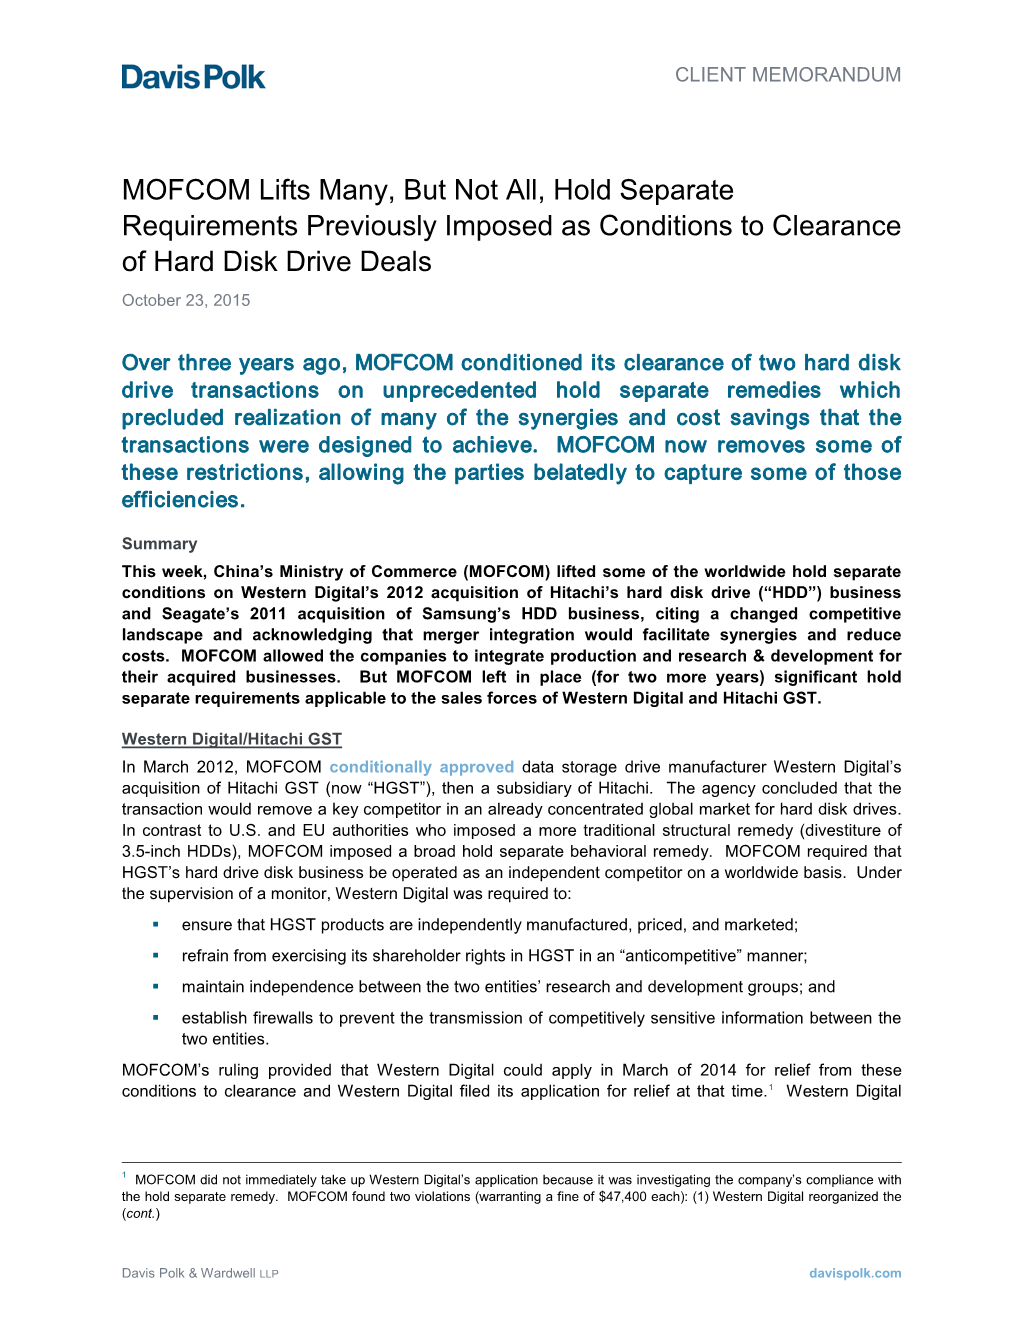 MOFCOM Lifts Many, but Not All, Hold Separate Requirements Previously Imposed As Conditions to Clearance of Hard Disk Drive Deals October 23, 2015